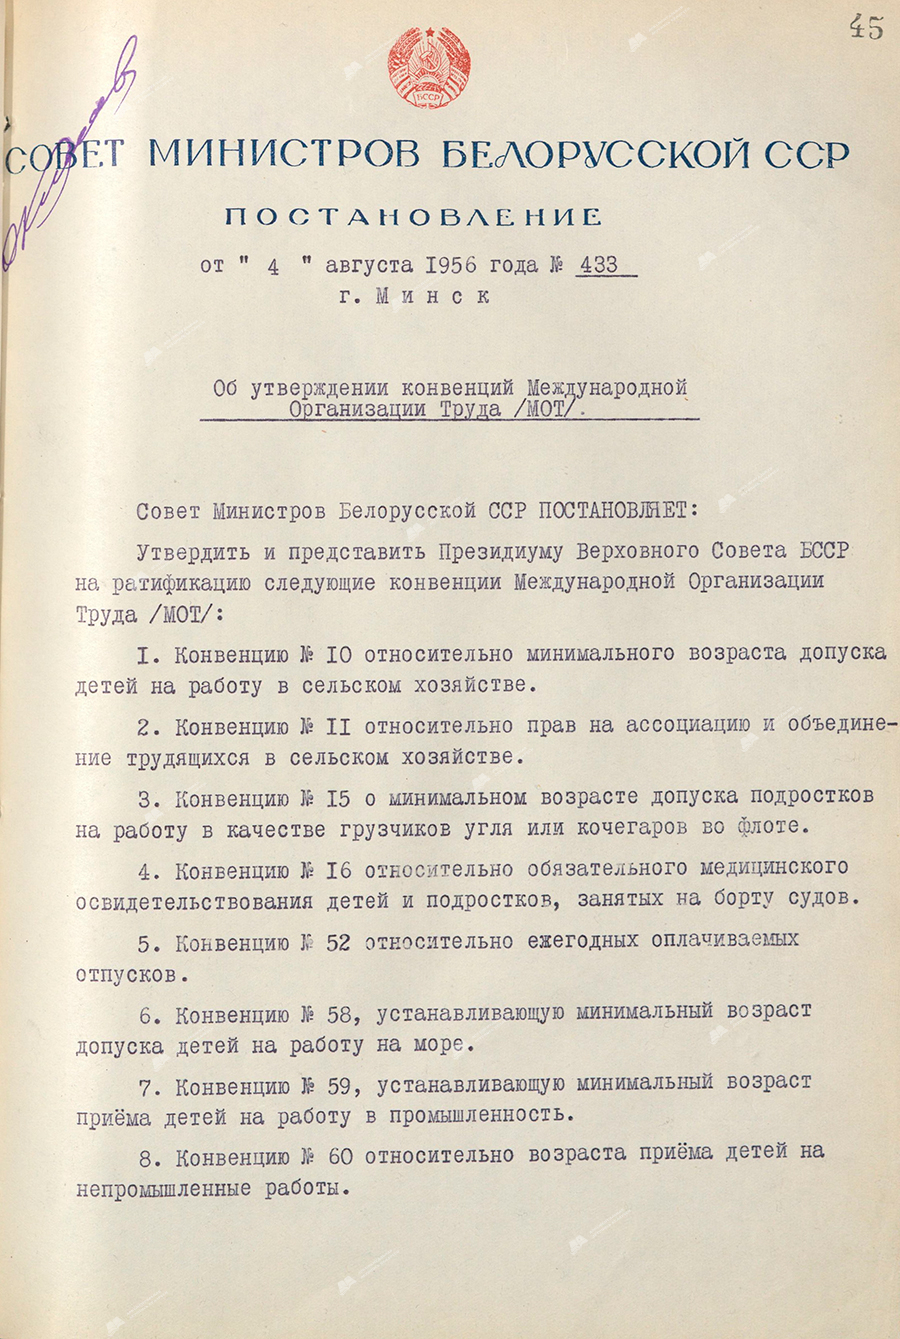 Resolution No. 433 of the Council of Ministers of the Byelorussian SSR «On approval of the conventions of the International Labor Organization (ILO)»-с. 0